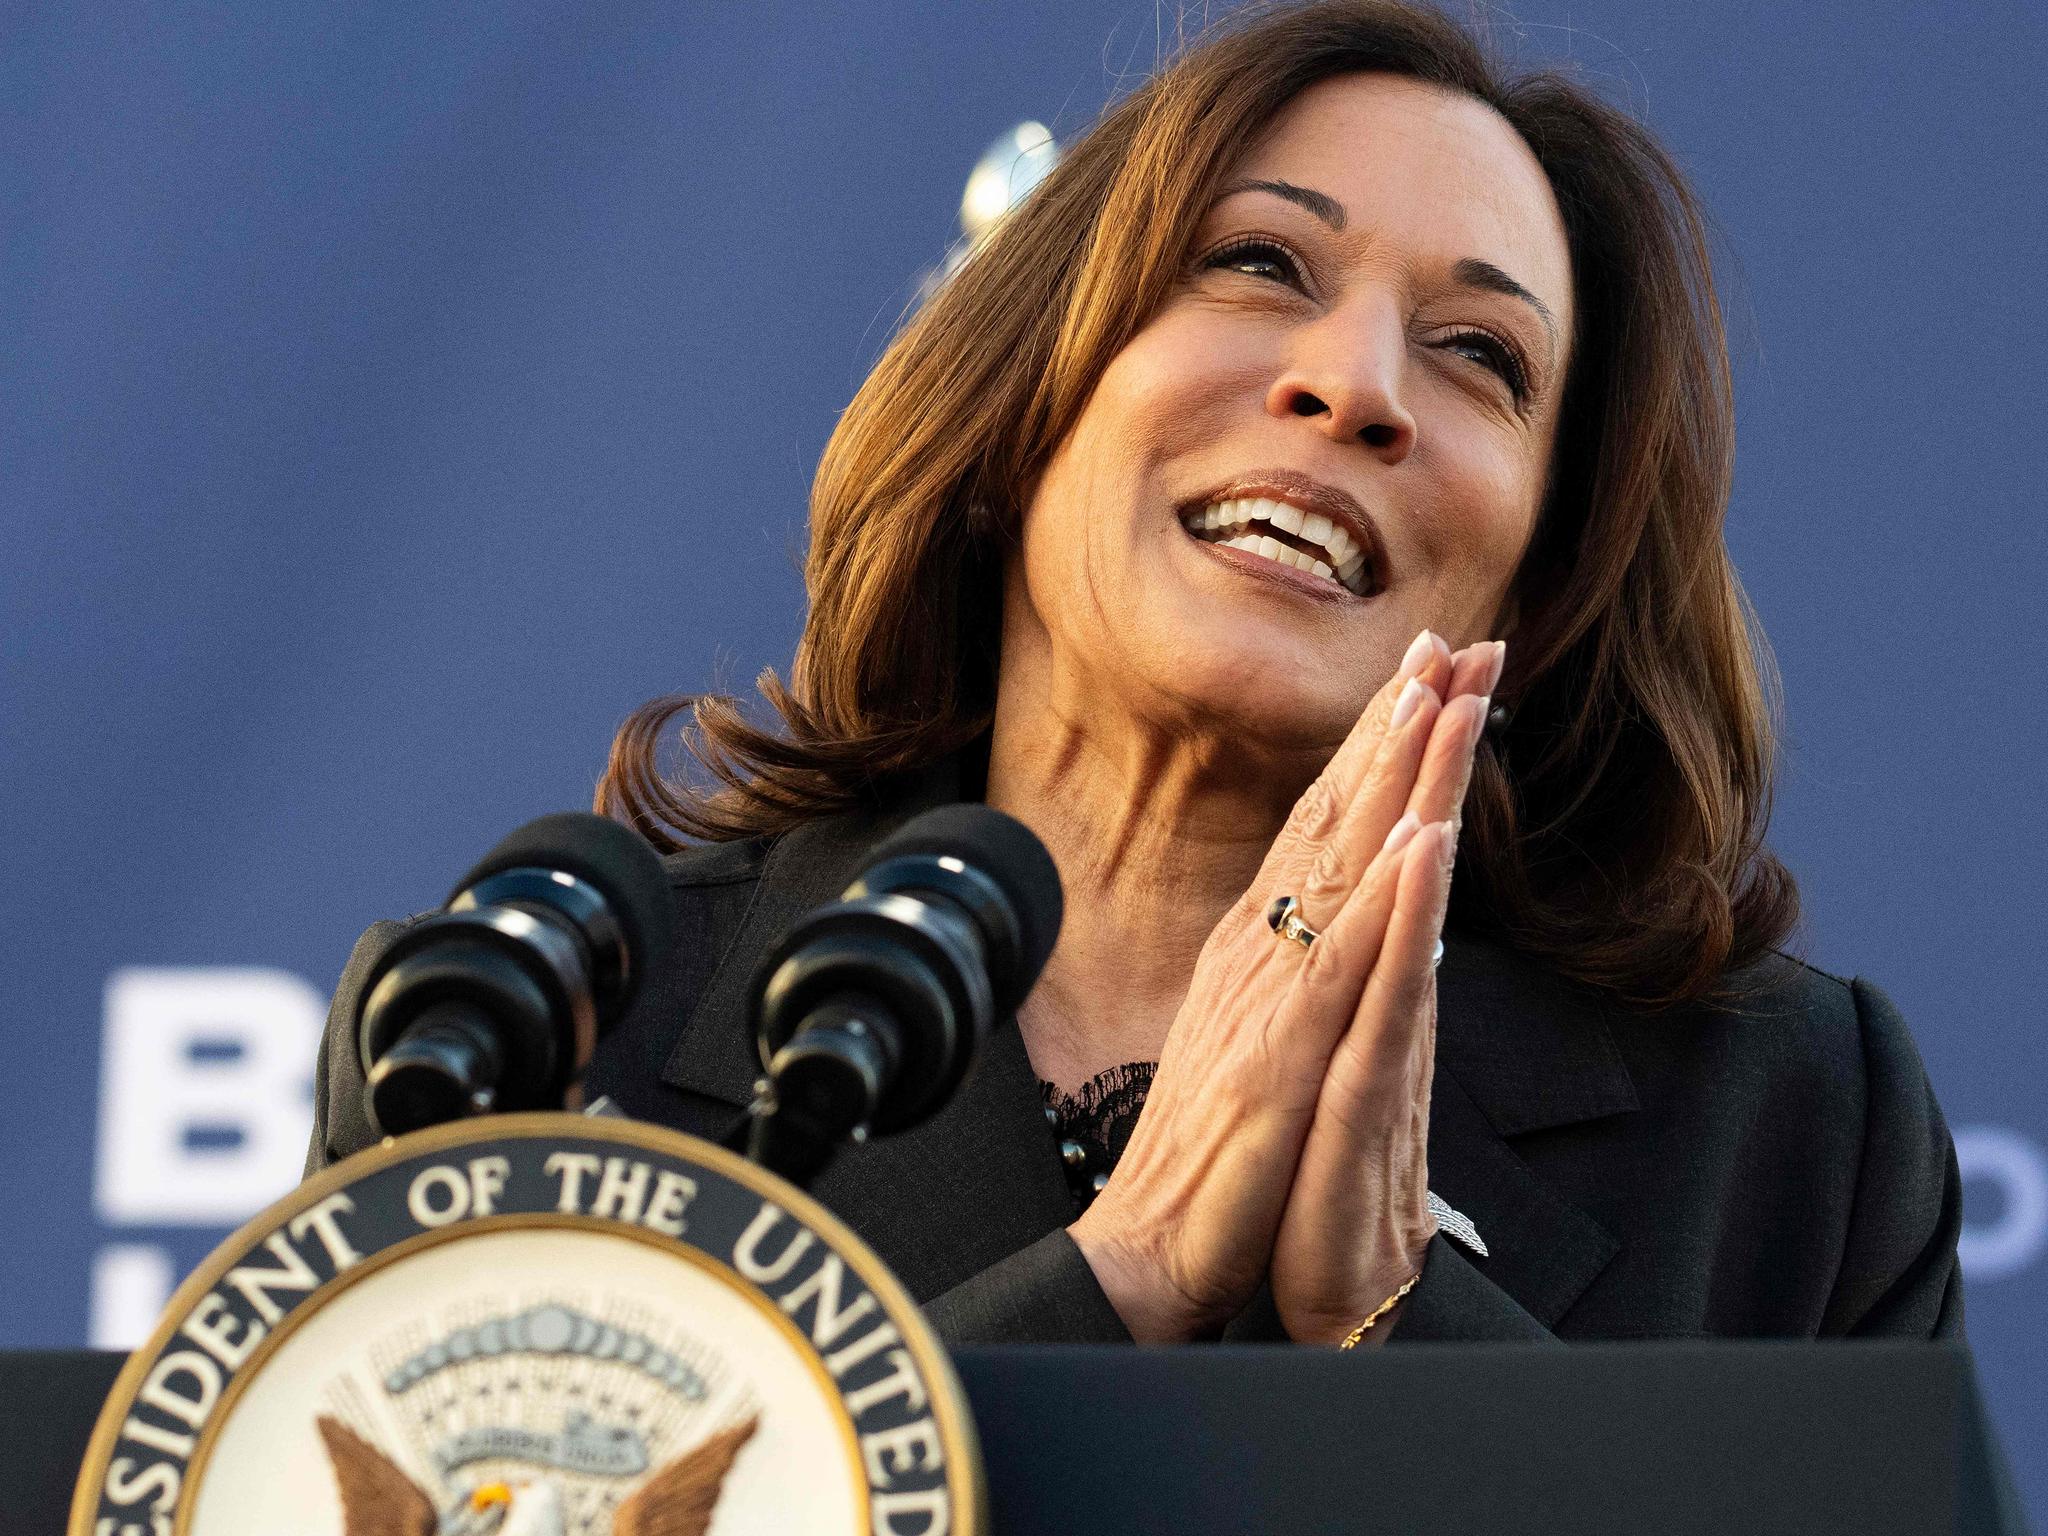 Harris leads as potential Democratic nominee if Biden withdraws (Credits: The Australian)